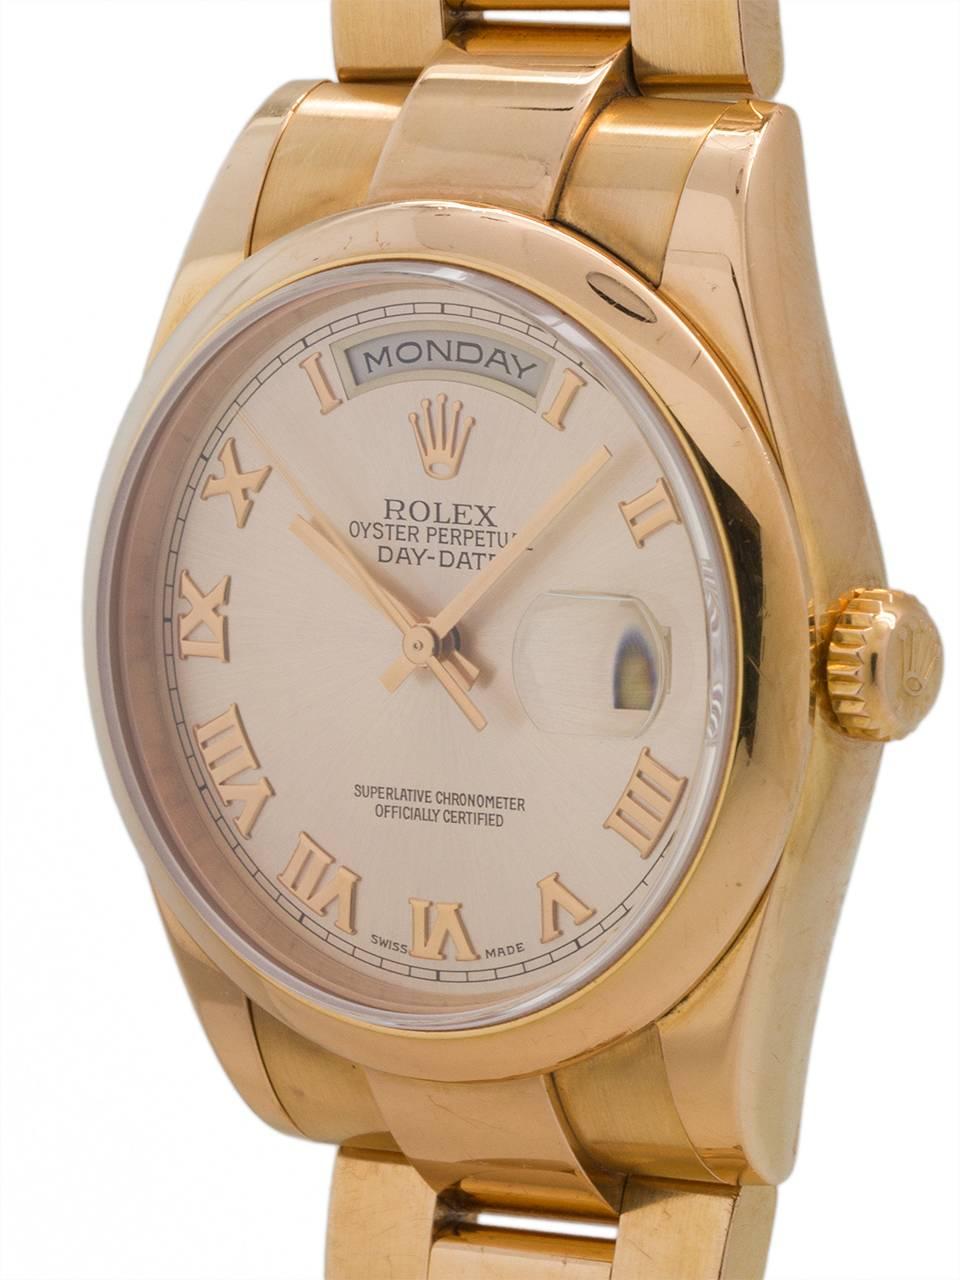 Rolex 18K PG Day Date President ref # 118235, serial# P8 circa 2000. 36mm full size man’s model with popular sporty style configuration consisting of smooth domed bezel and Oyster Presidential bracelet with hidden clasp.  Featuring original and very